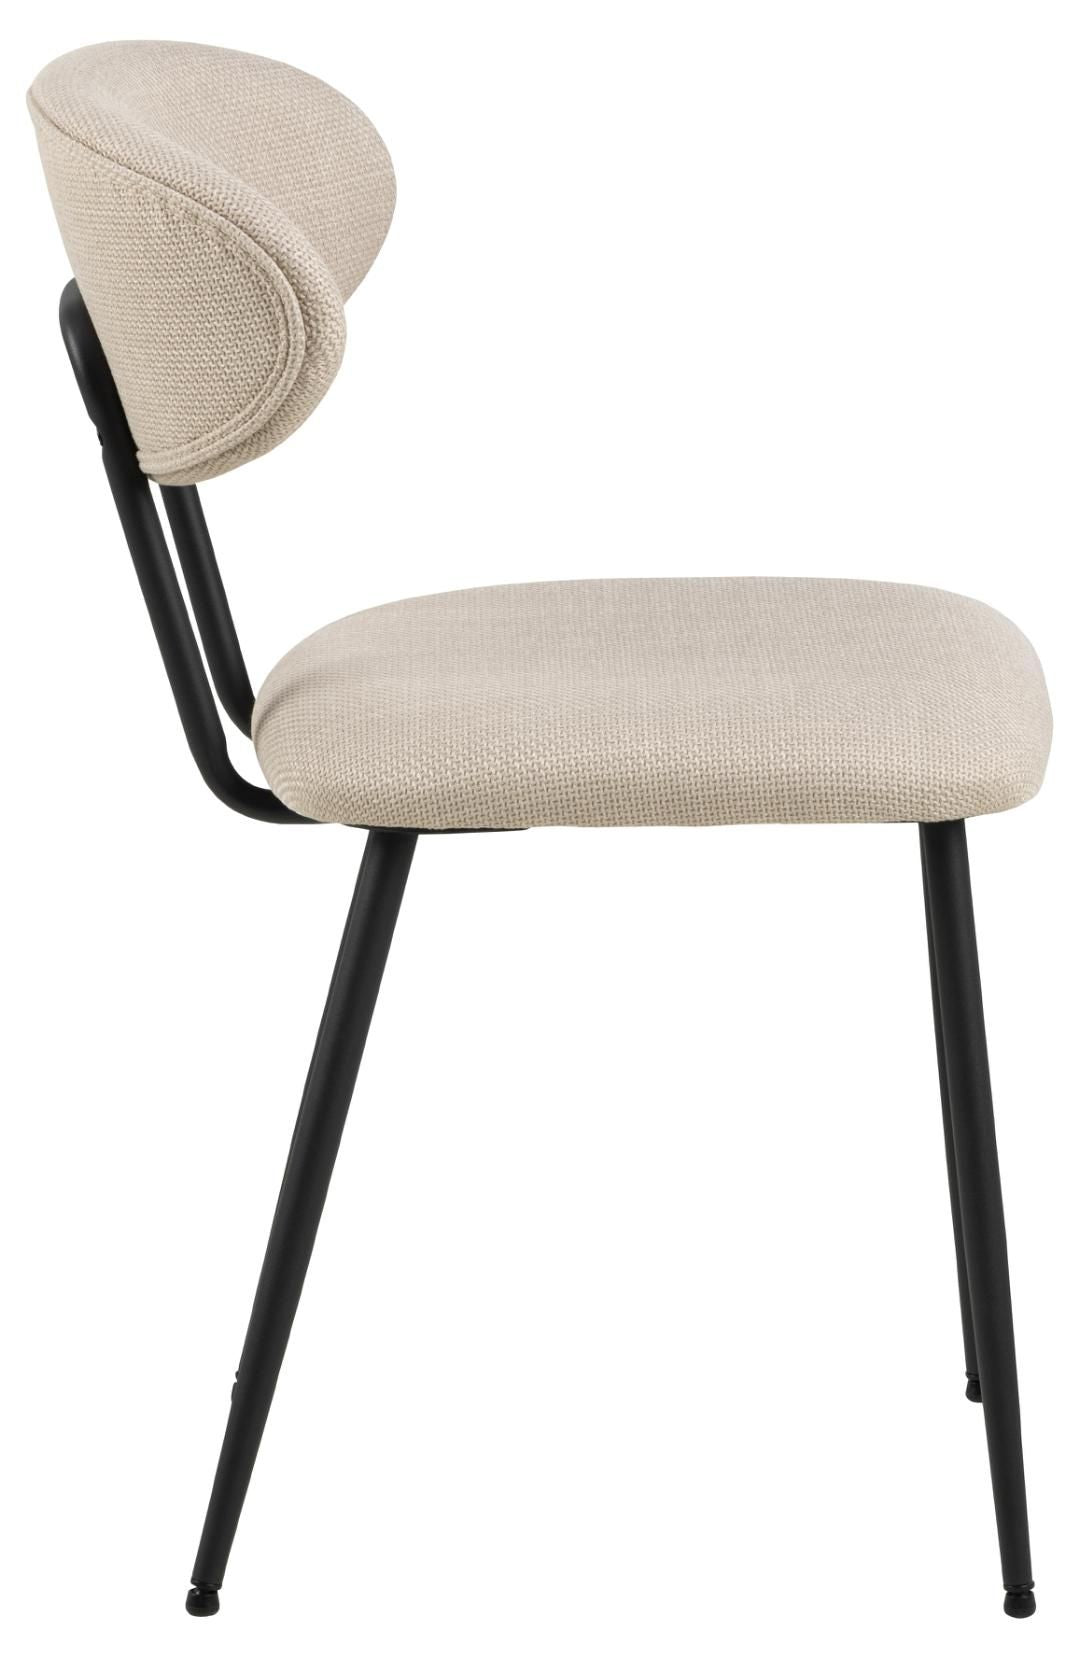 Denise dining chair